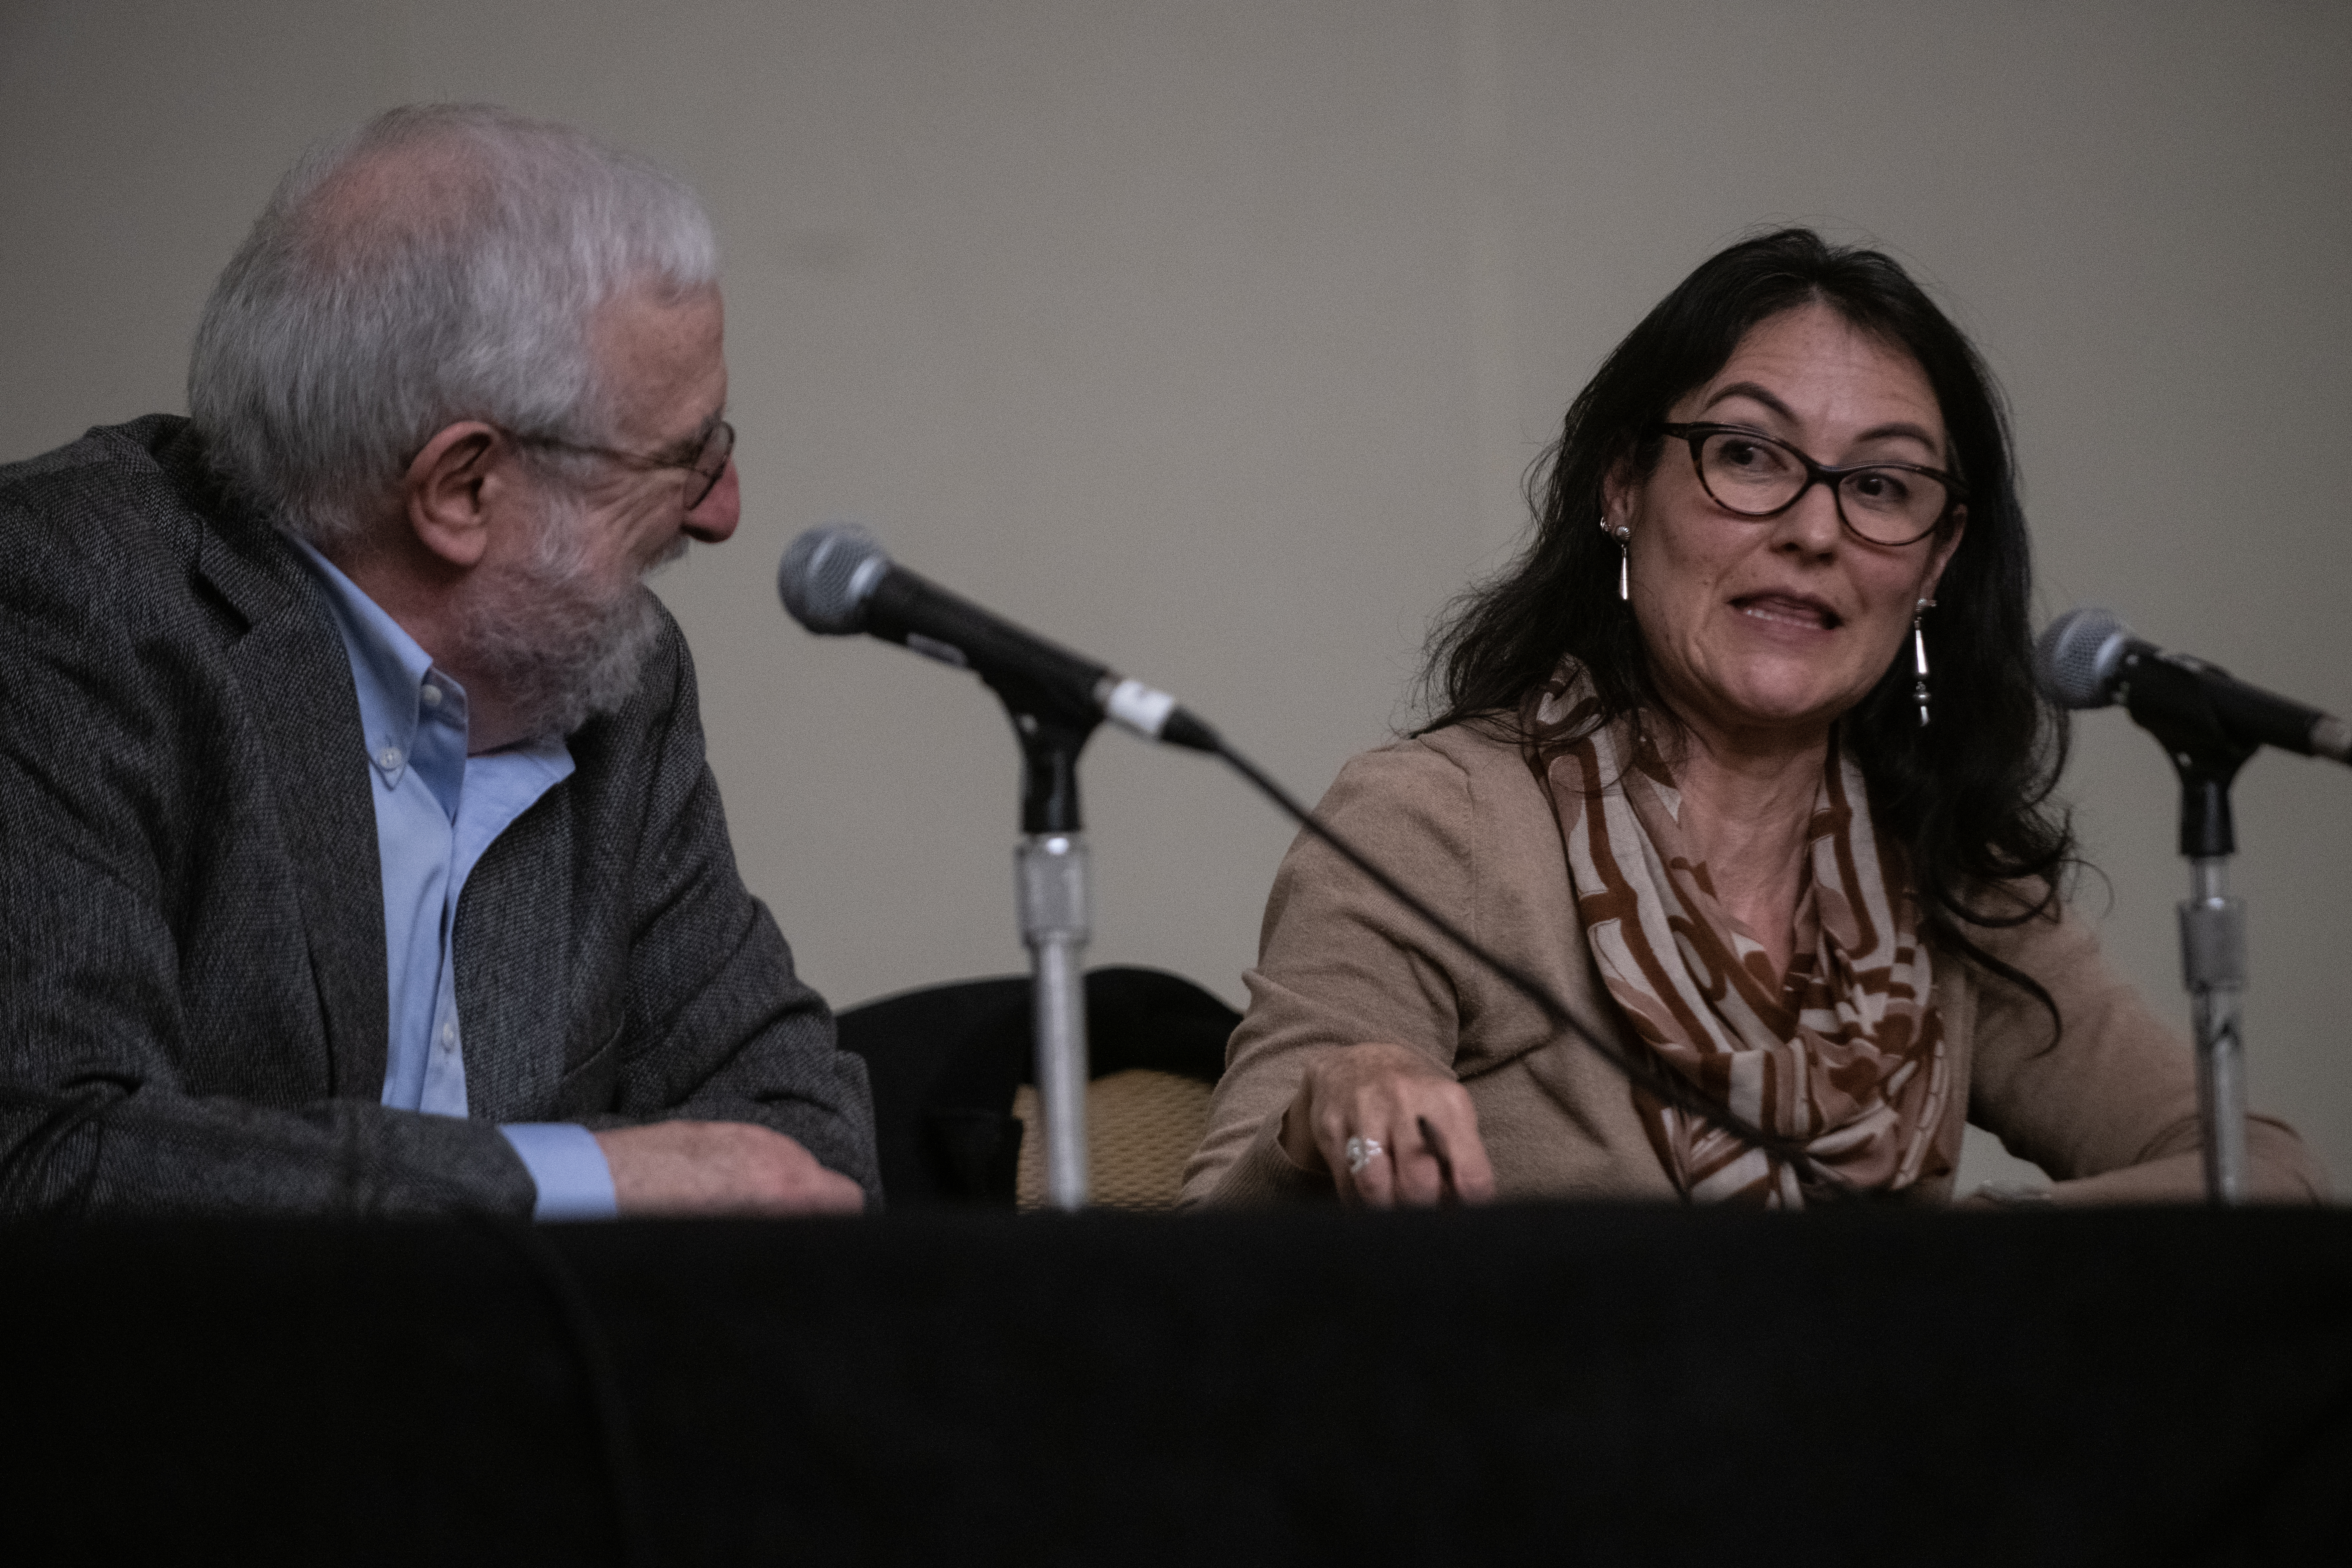 JShelly Lowe (right), chair of the National Endowment for the Humanities, visited for a plenary conversation with AHA executive director James Grossman.